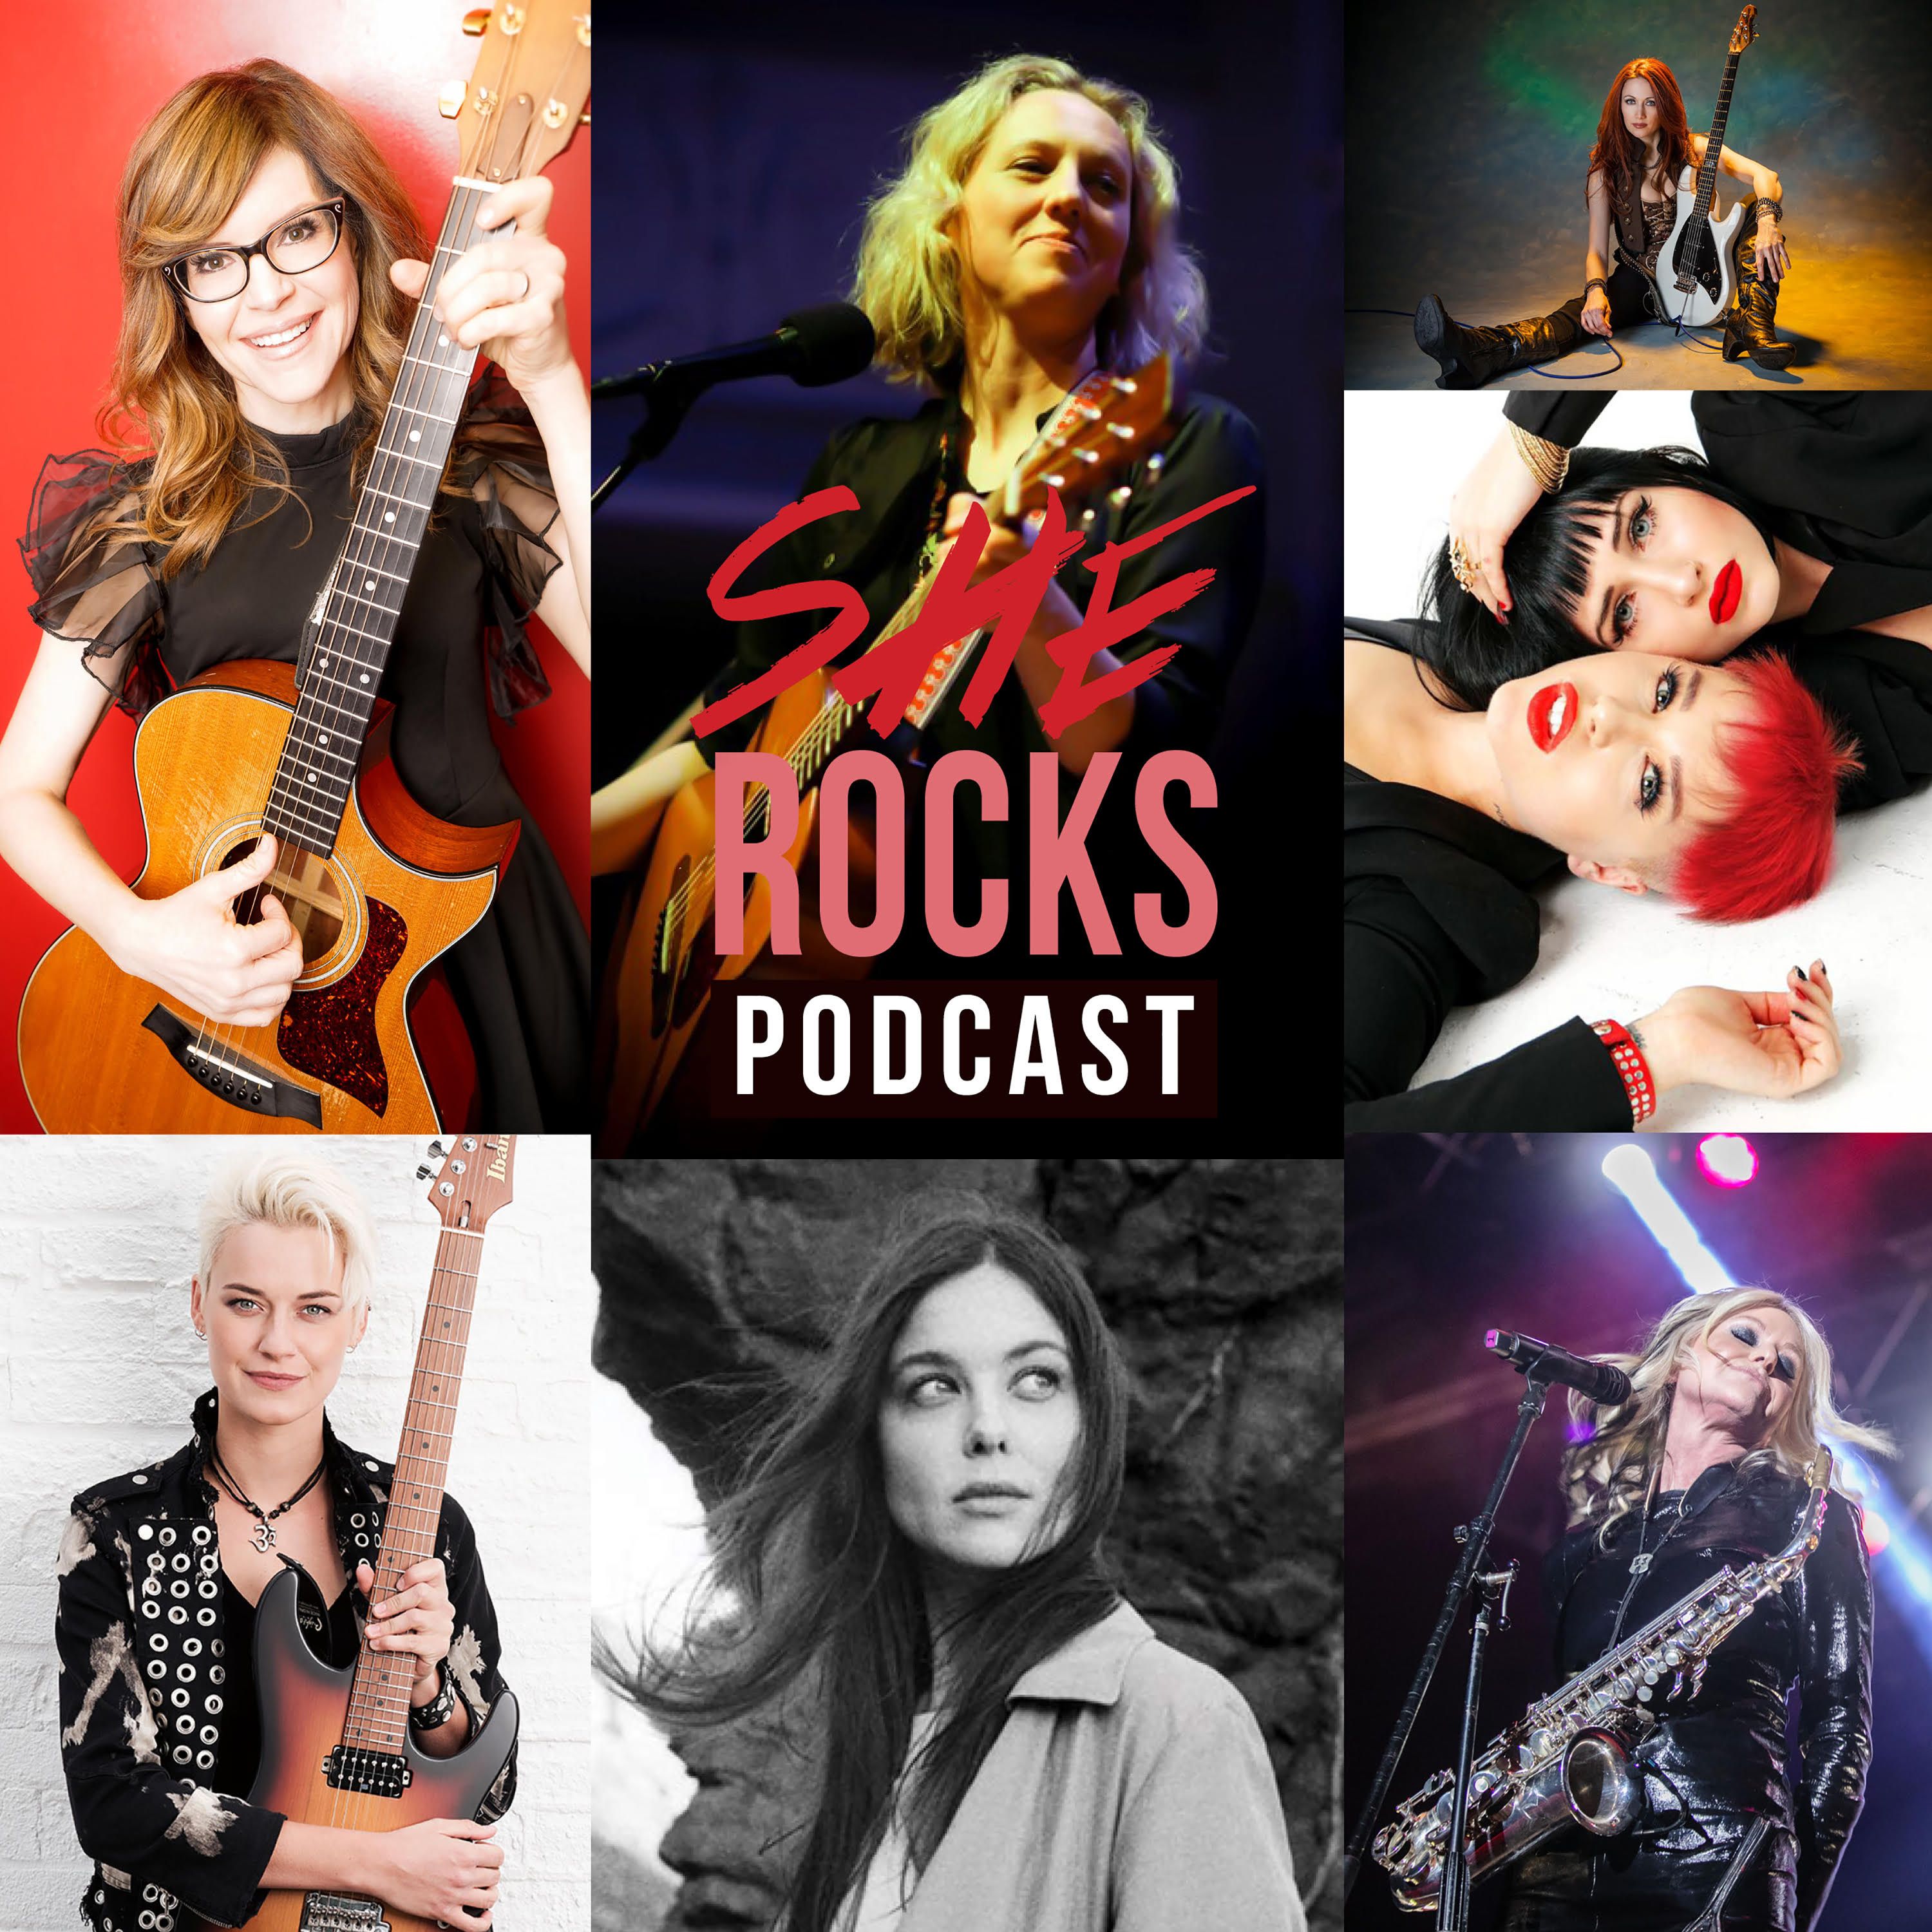 ‘She Rocks Podcast’ Is One For the Ladies